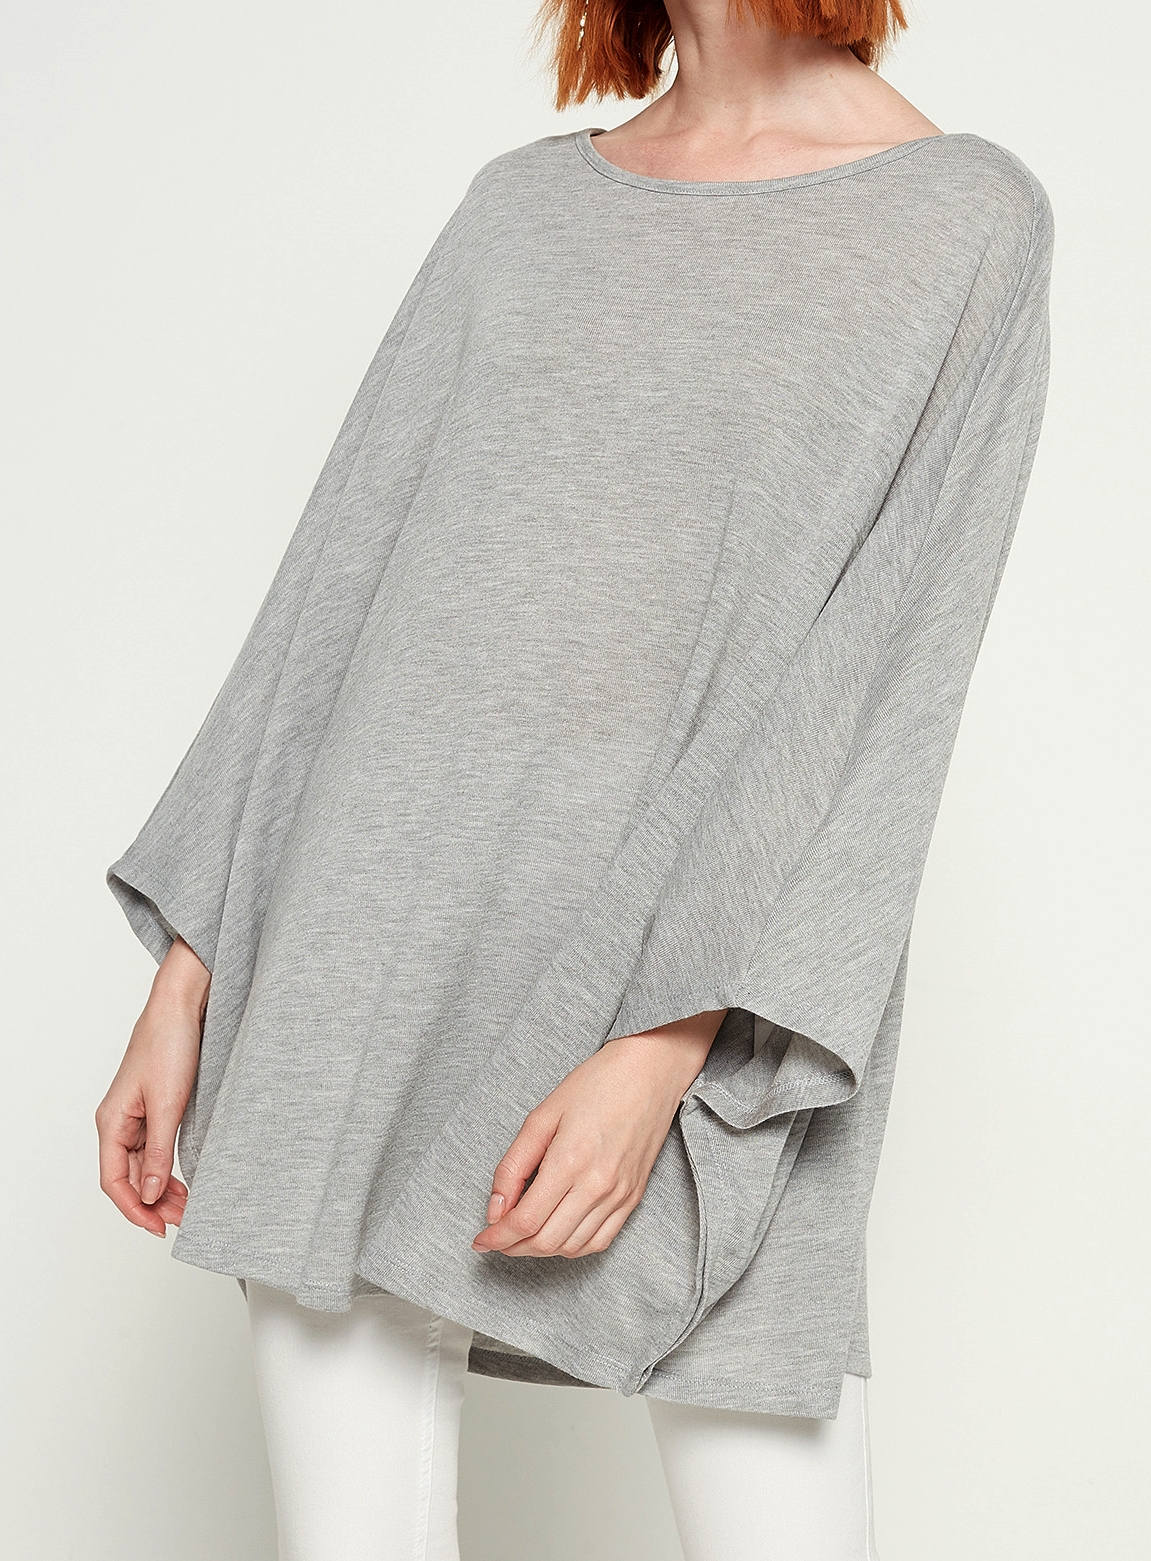 Batwing Arm Asymmetrical Draped Boat Neck Silky Summer Loose - Etsy